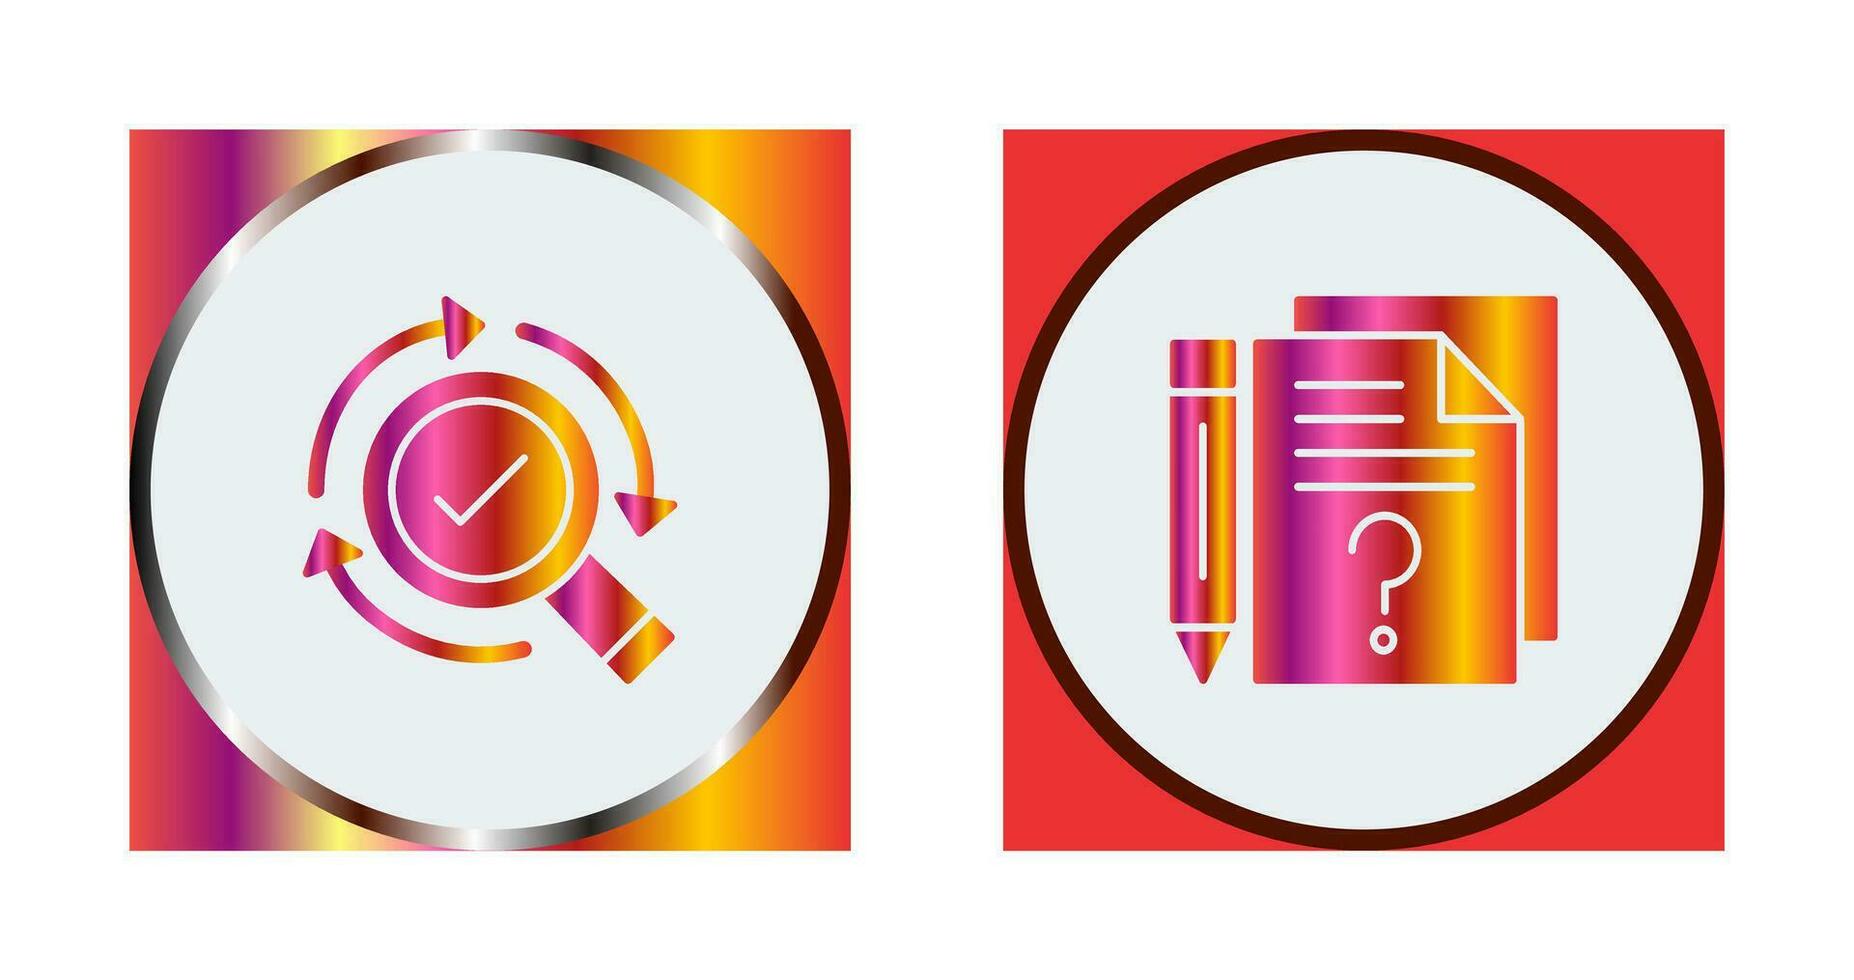 Research and Question Icon vector